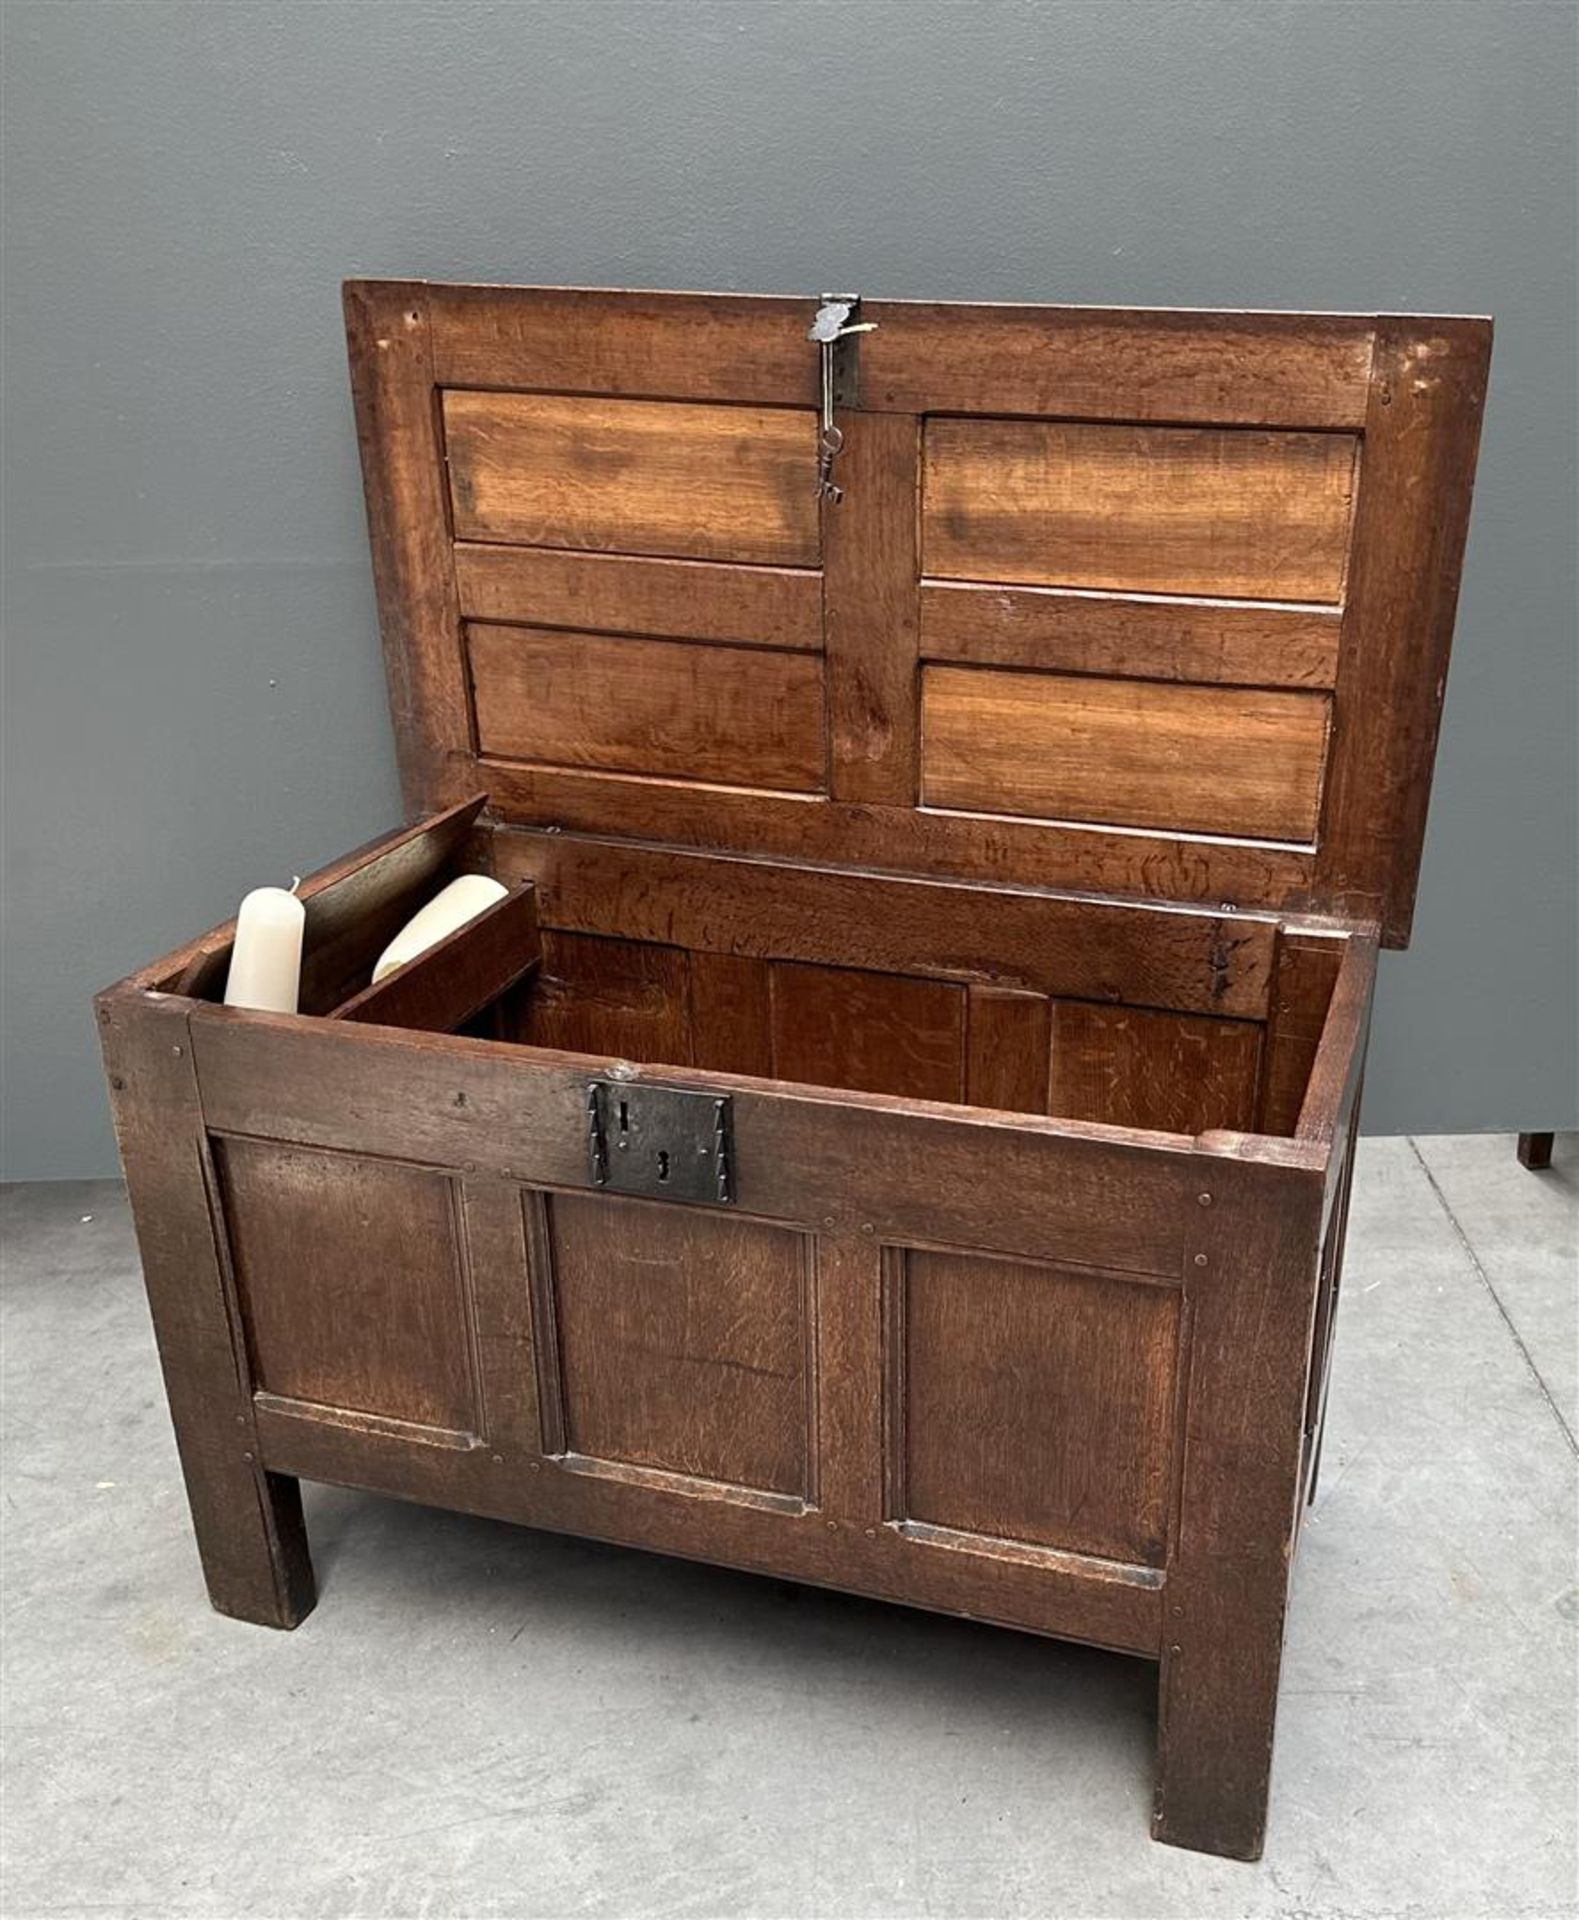 An early 18th century oak bridal chest with candle compartment. - Image 2 of 3